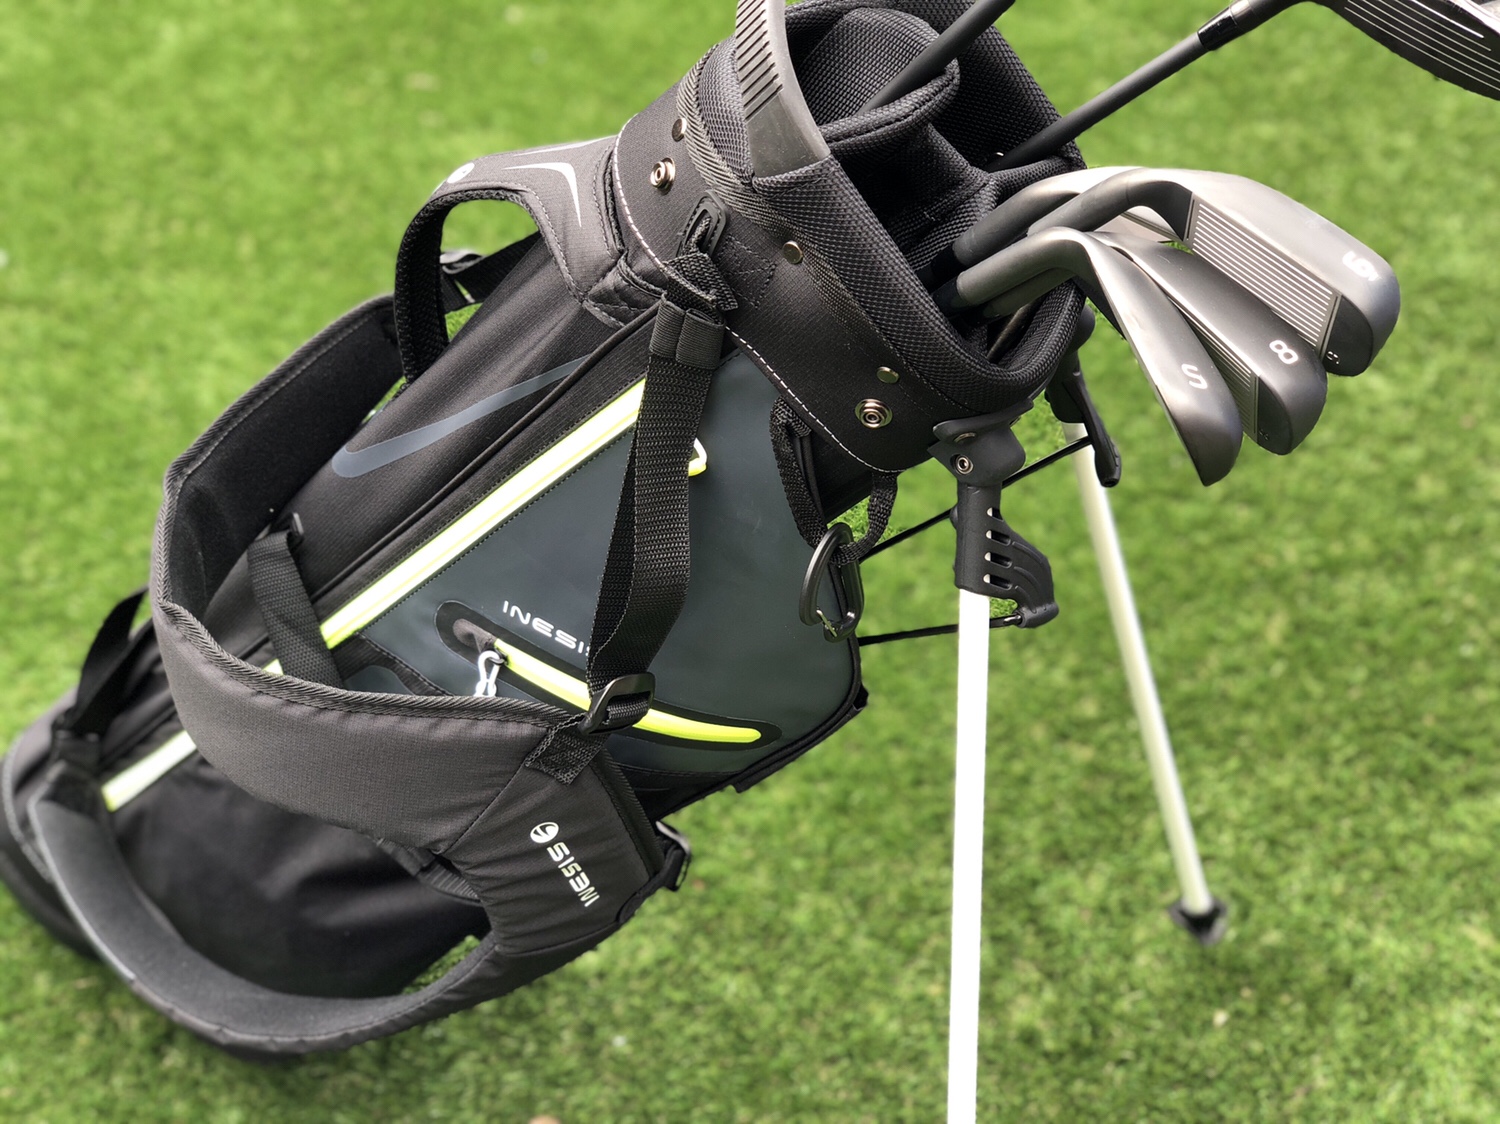 inesis golf clubs review